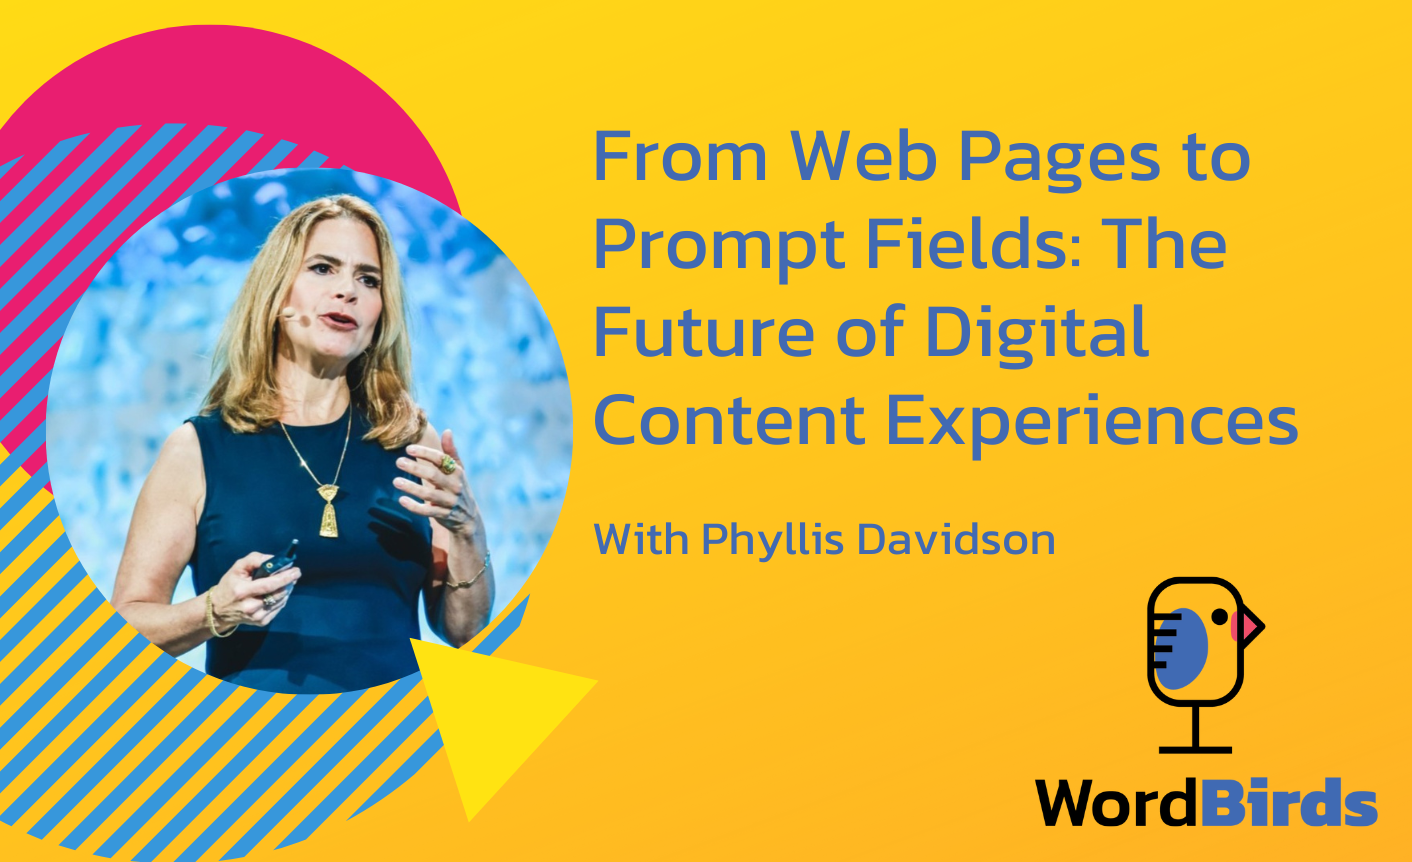 On a yellow background with a headshot of Phyllis Davidson on the left, the title reads "From Web Pages to Prompt Fields: The Future of Digital Content Experiences."